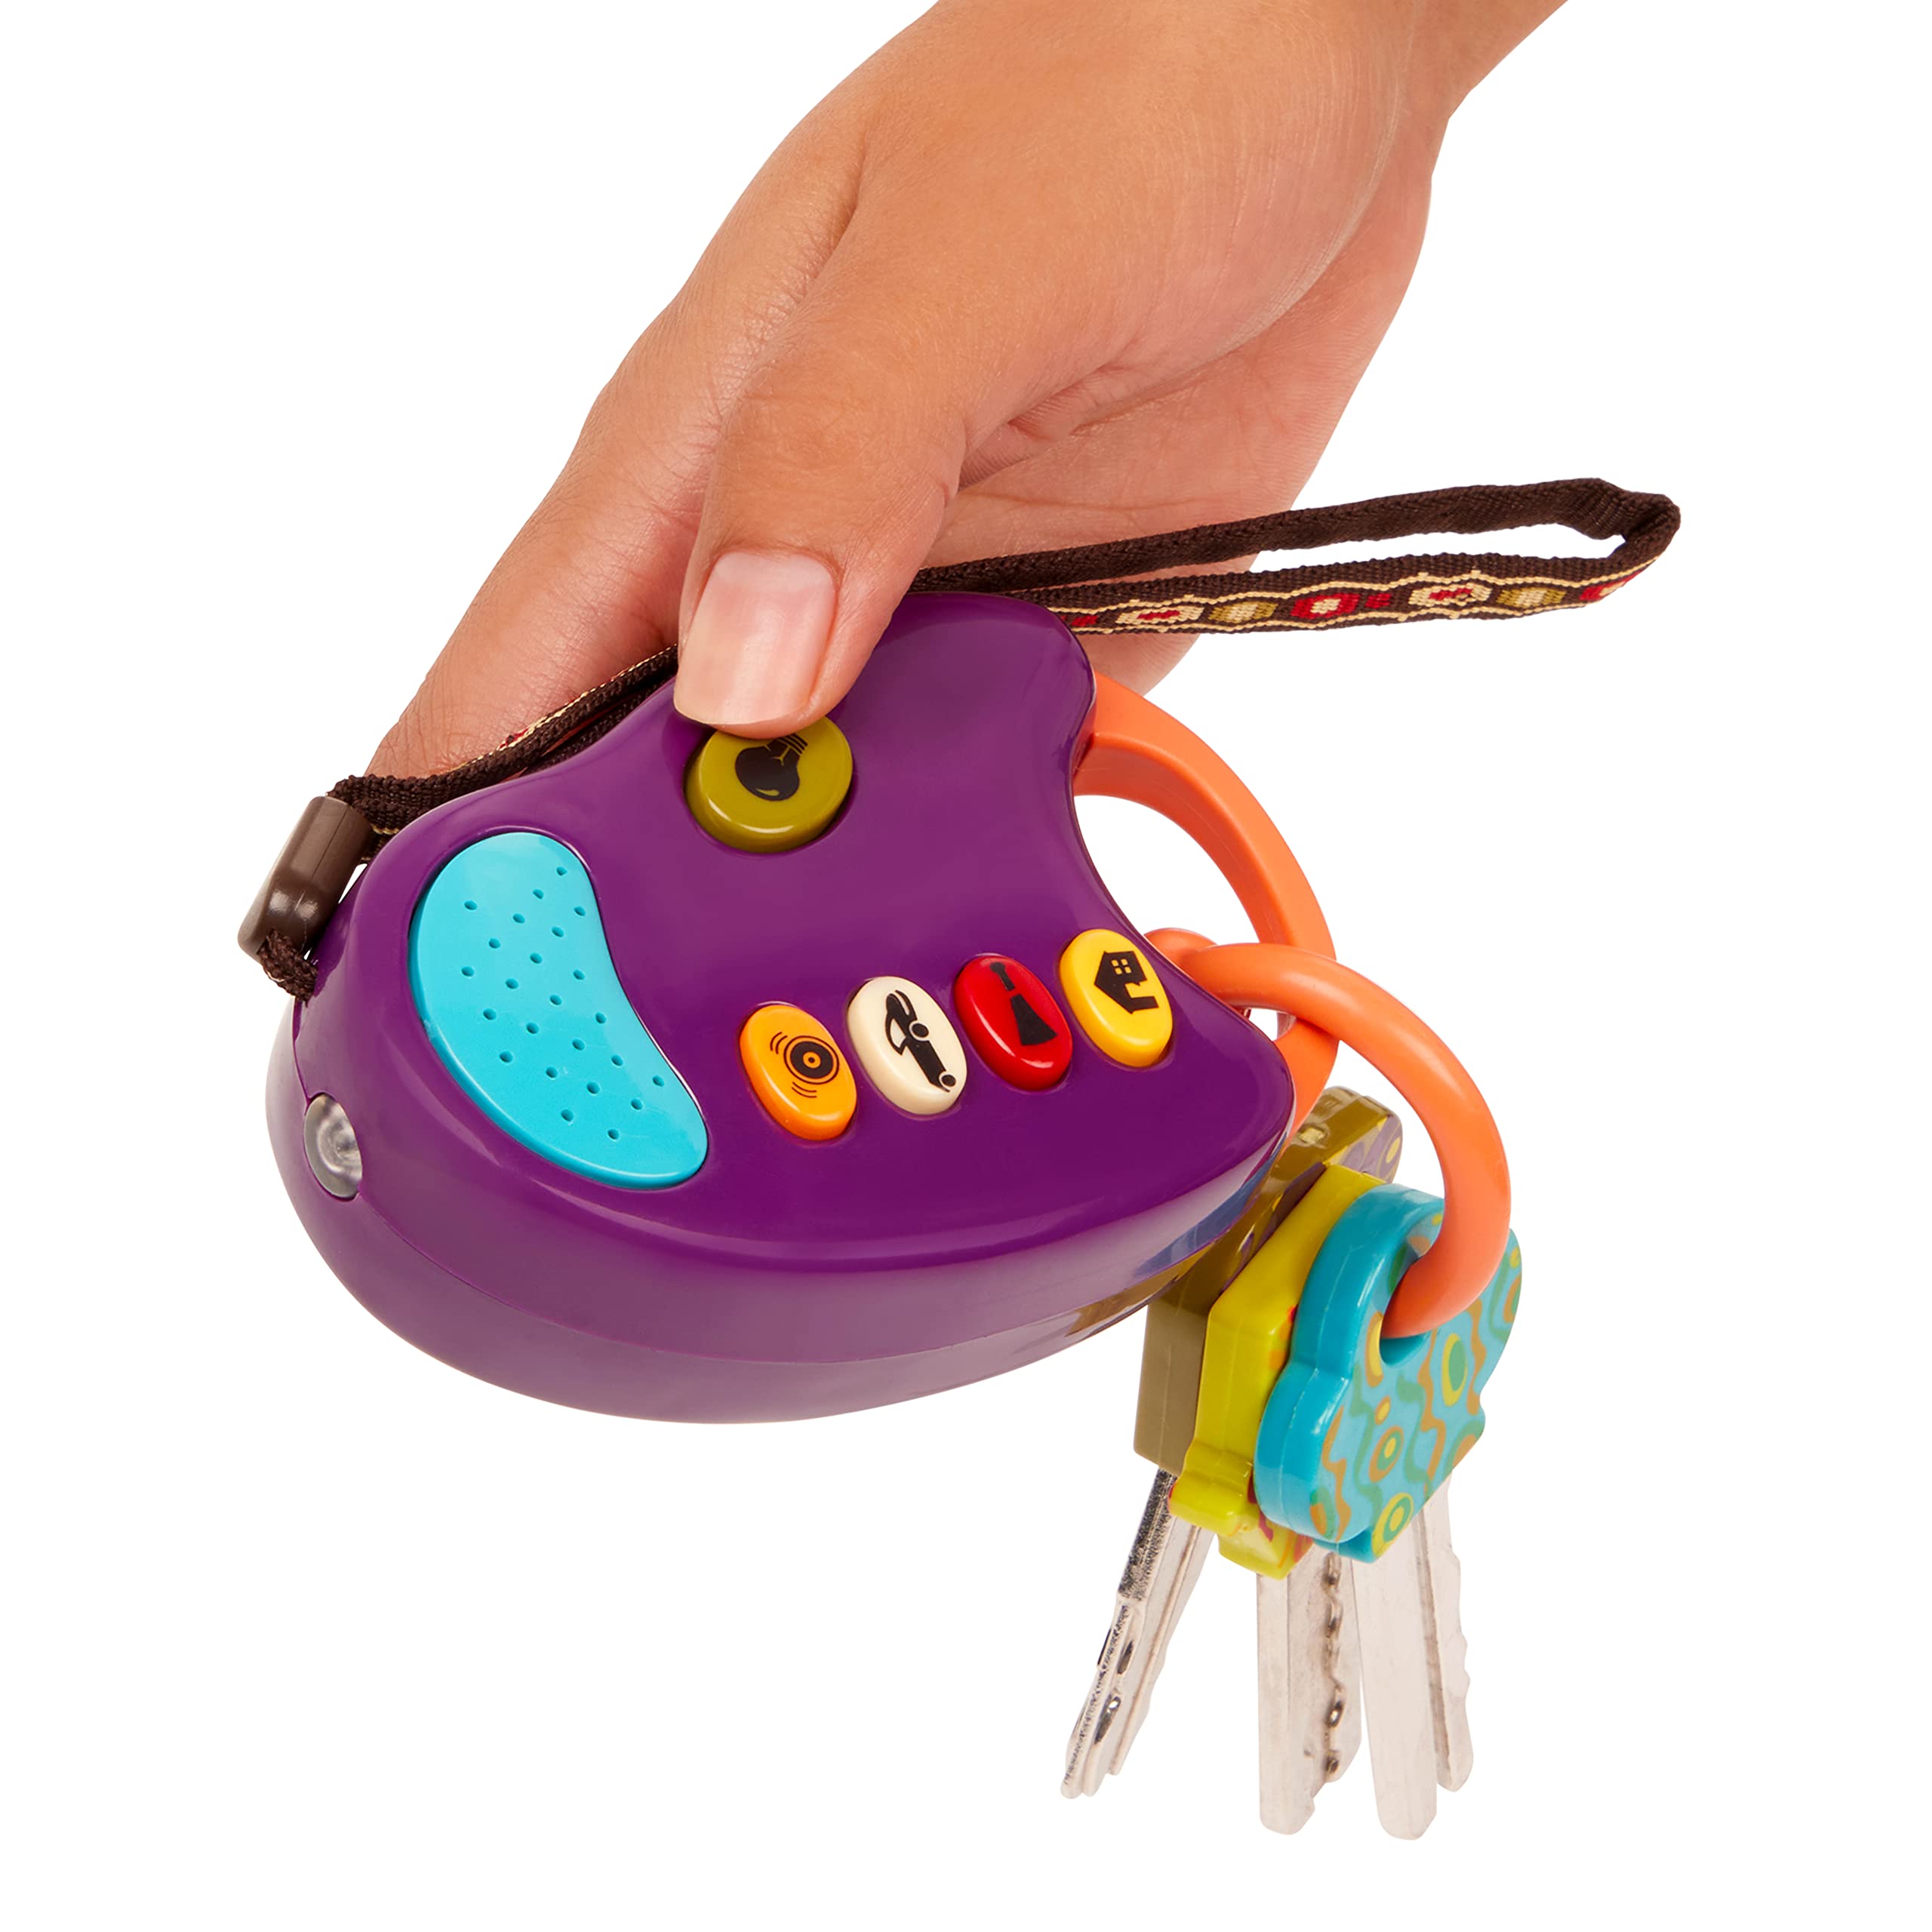 B. toys – Purple FunKeys – Toy Car Keys – Key Fob with Lights & Sounds – Interactive Baby Toy – Pretend Keys for Babies, Toddlers – 6 Months +